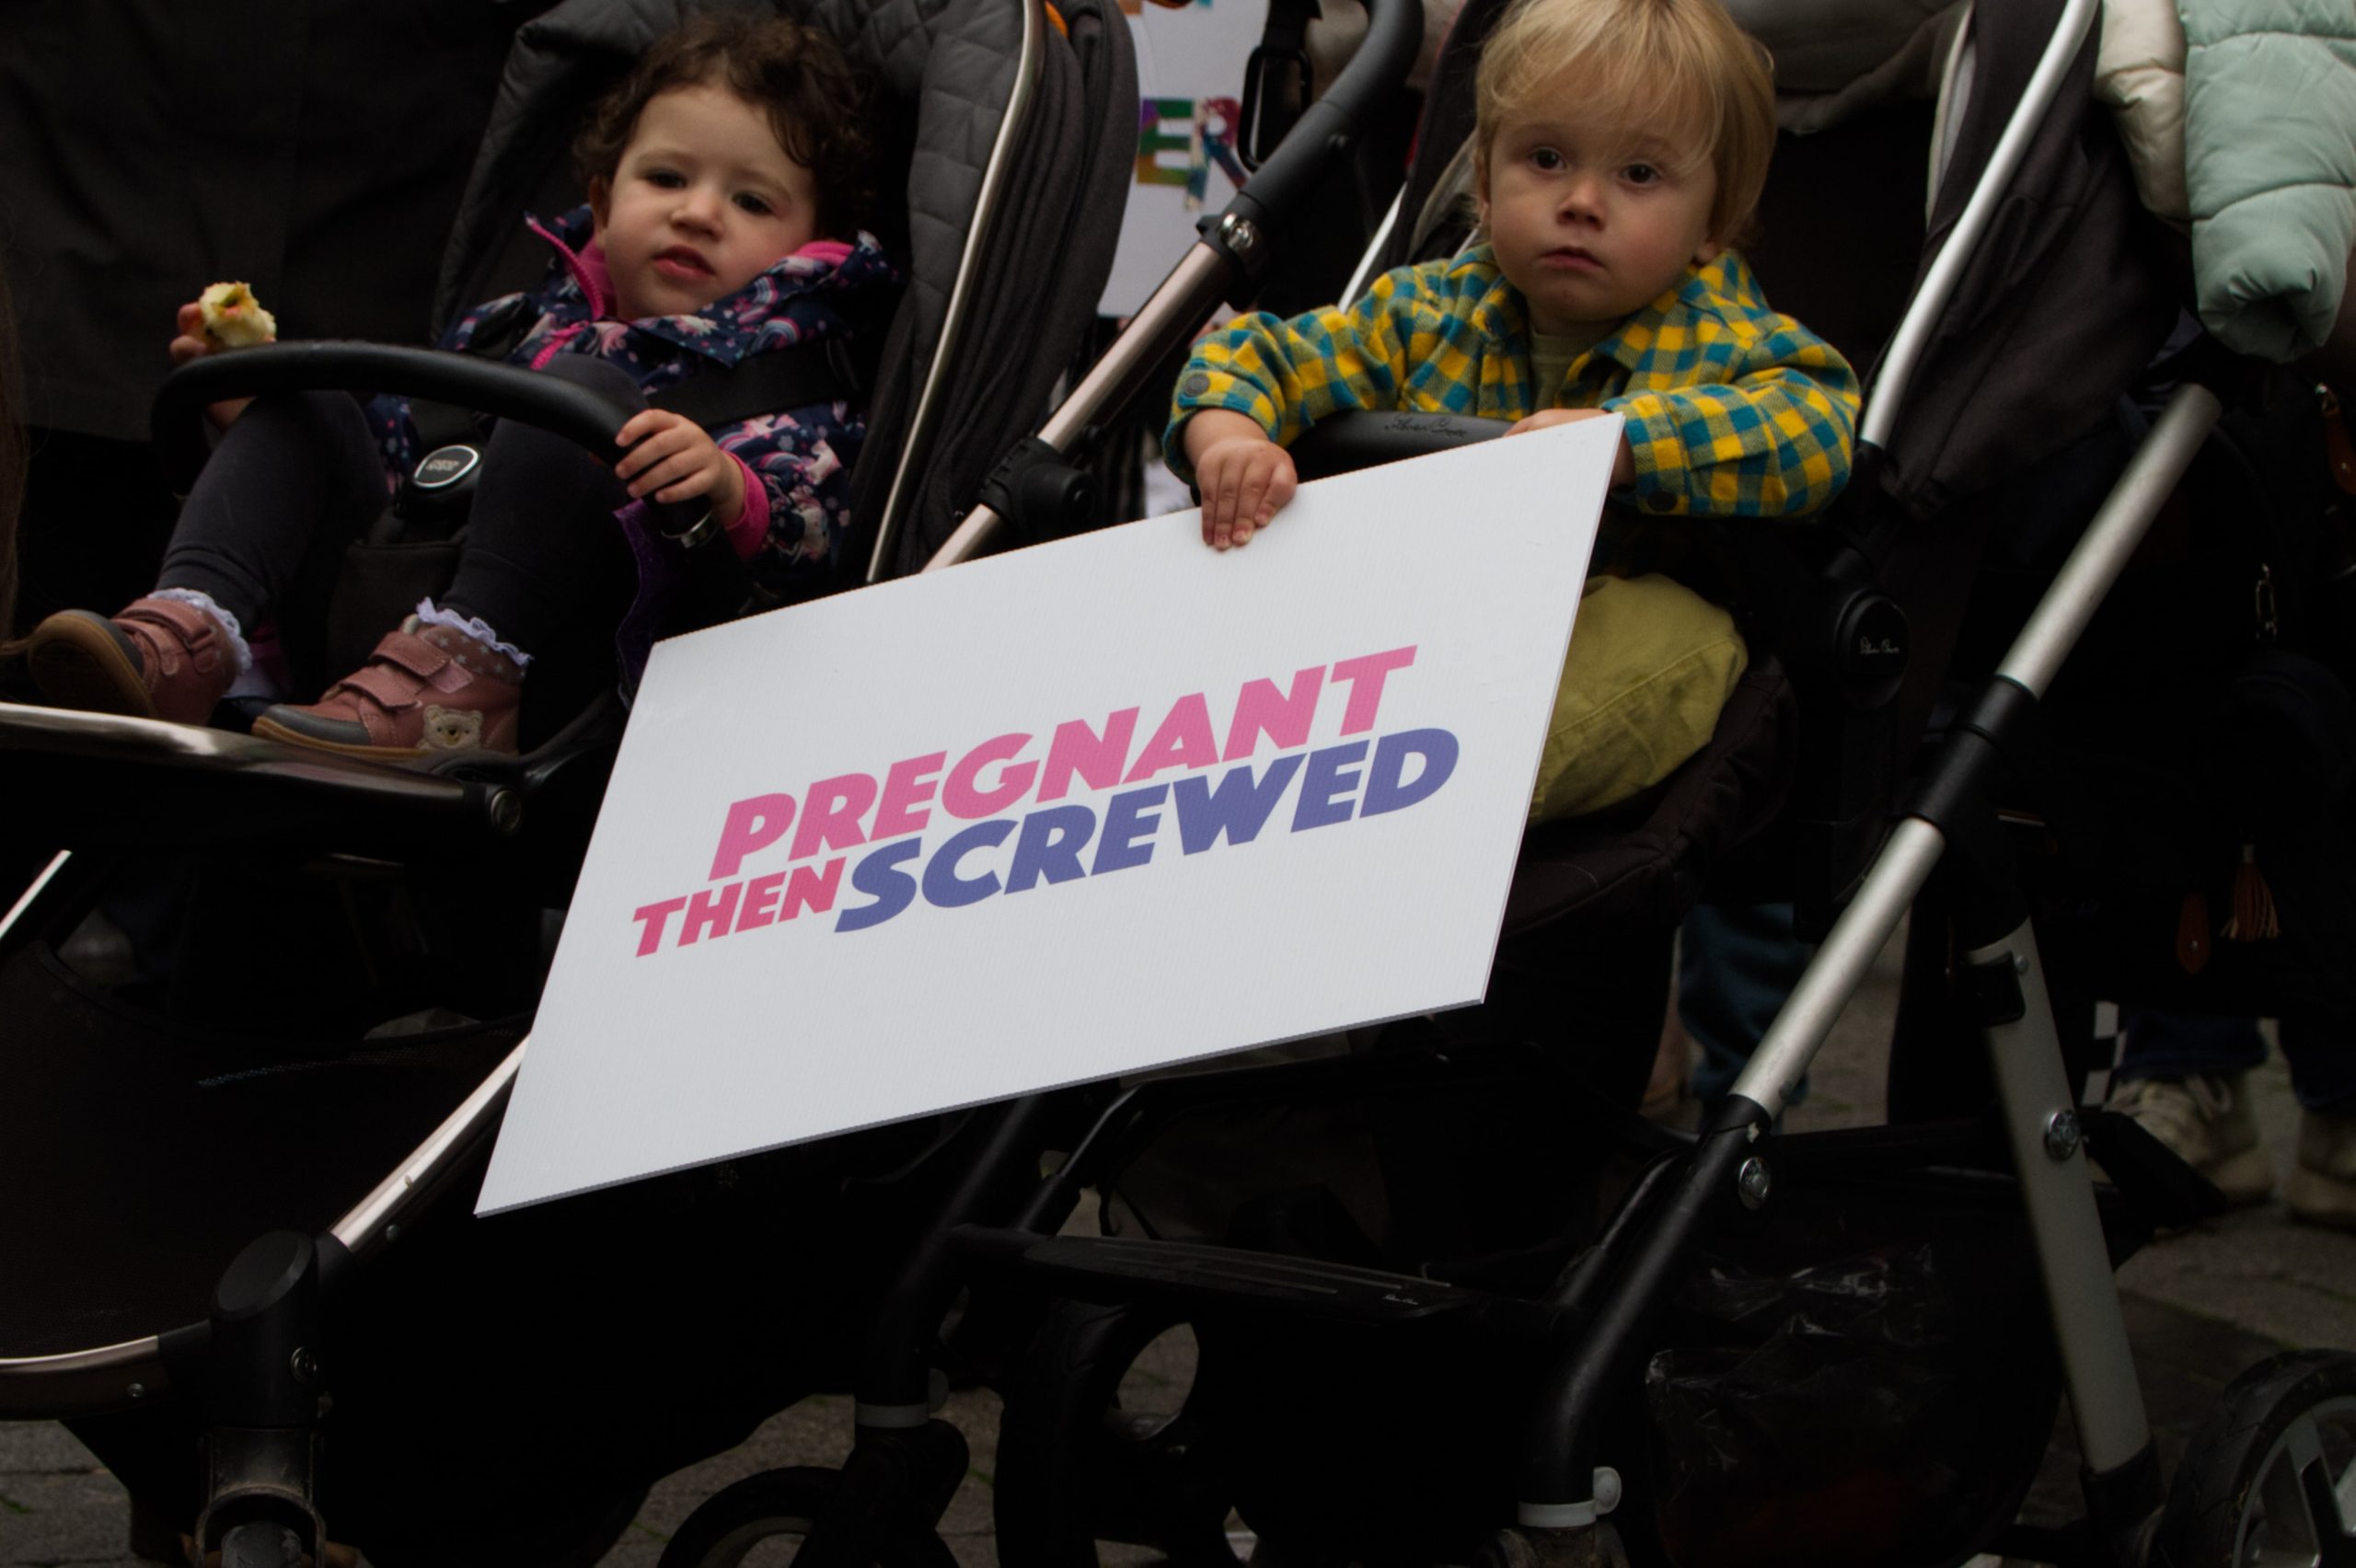 Alt text: child in buggy holding a Pregnant Then Screwed placard